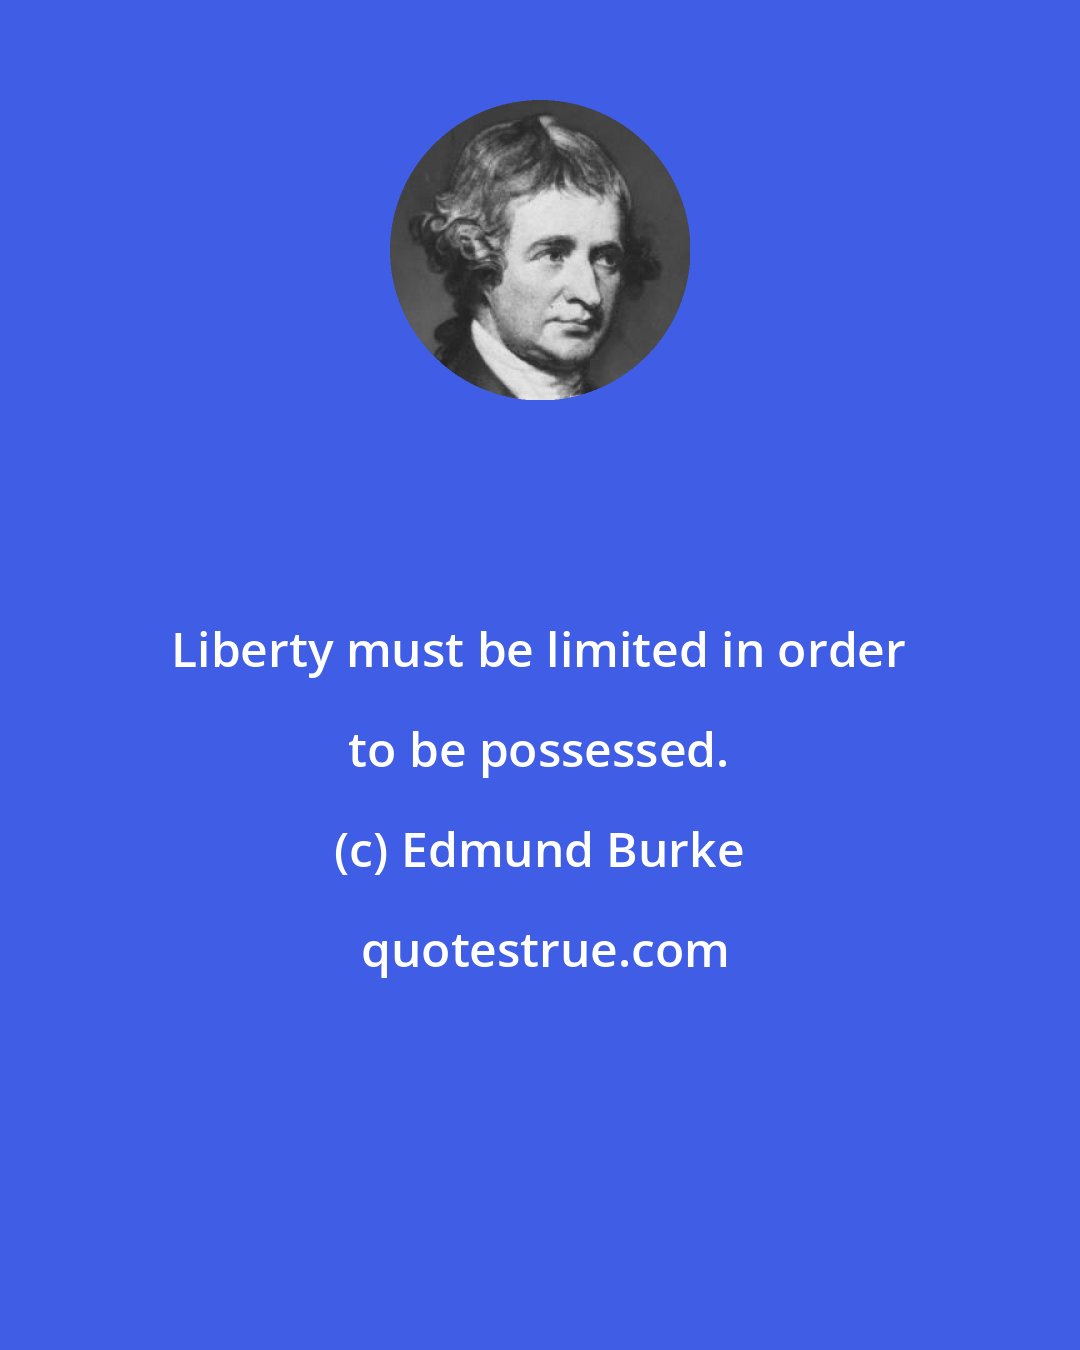 Edmund Burke: Liberty must be limited in order to be possessed.